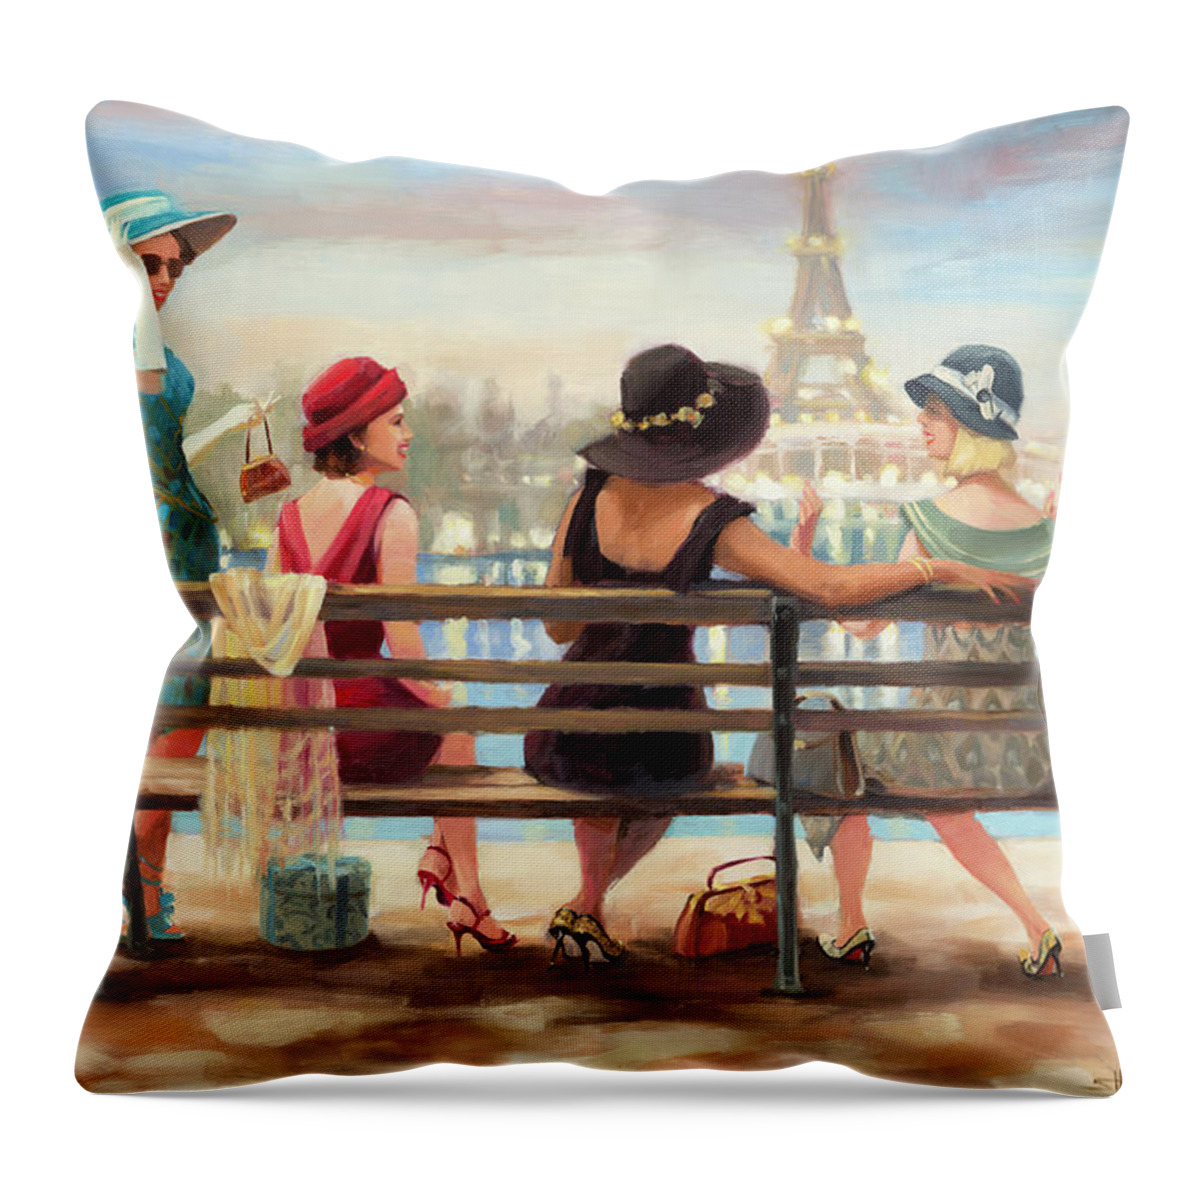 Paris Throw Pillow featuring the painting Girls Day Out by Steve Henderson